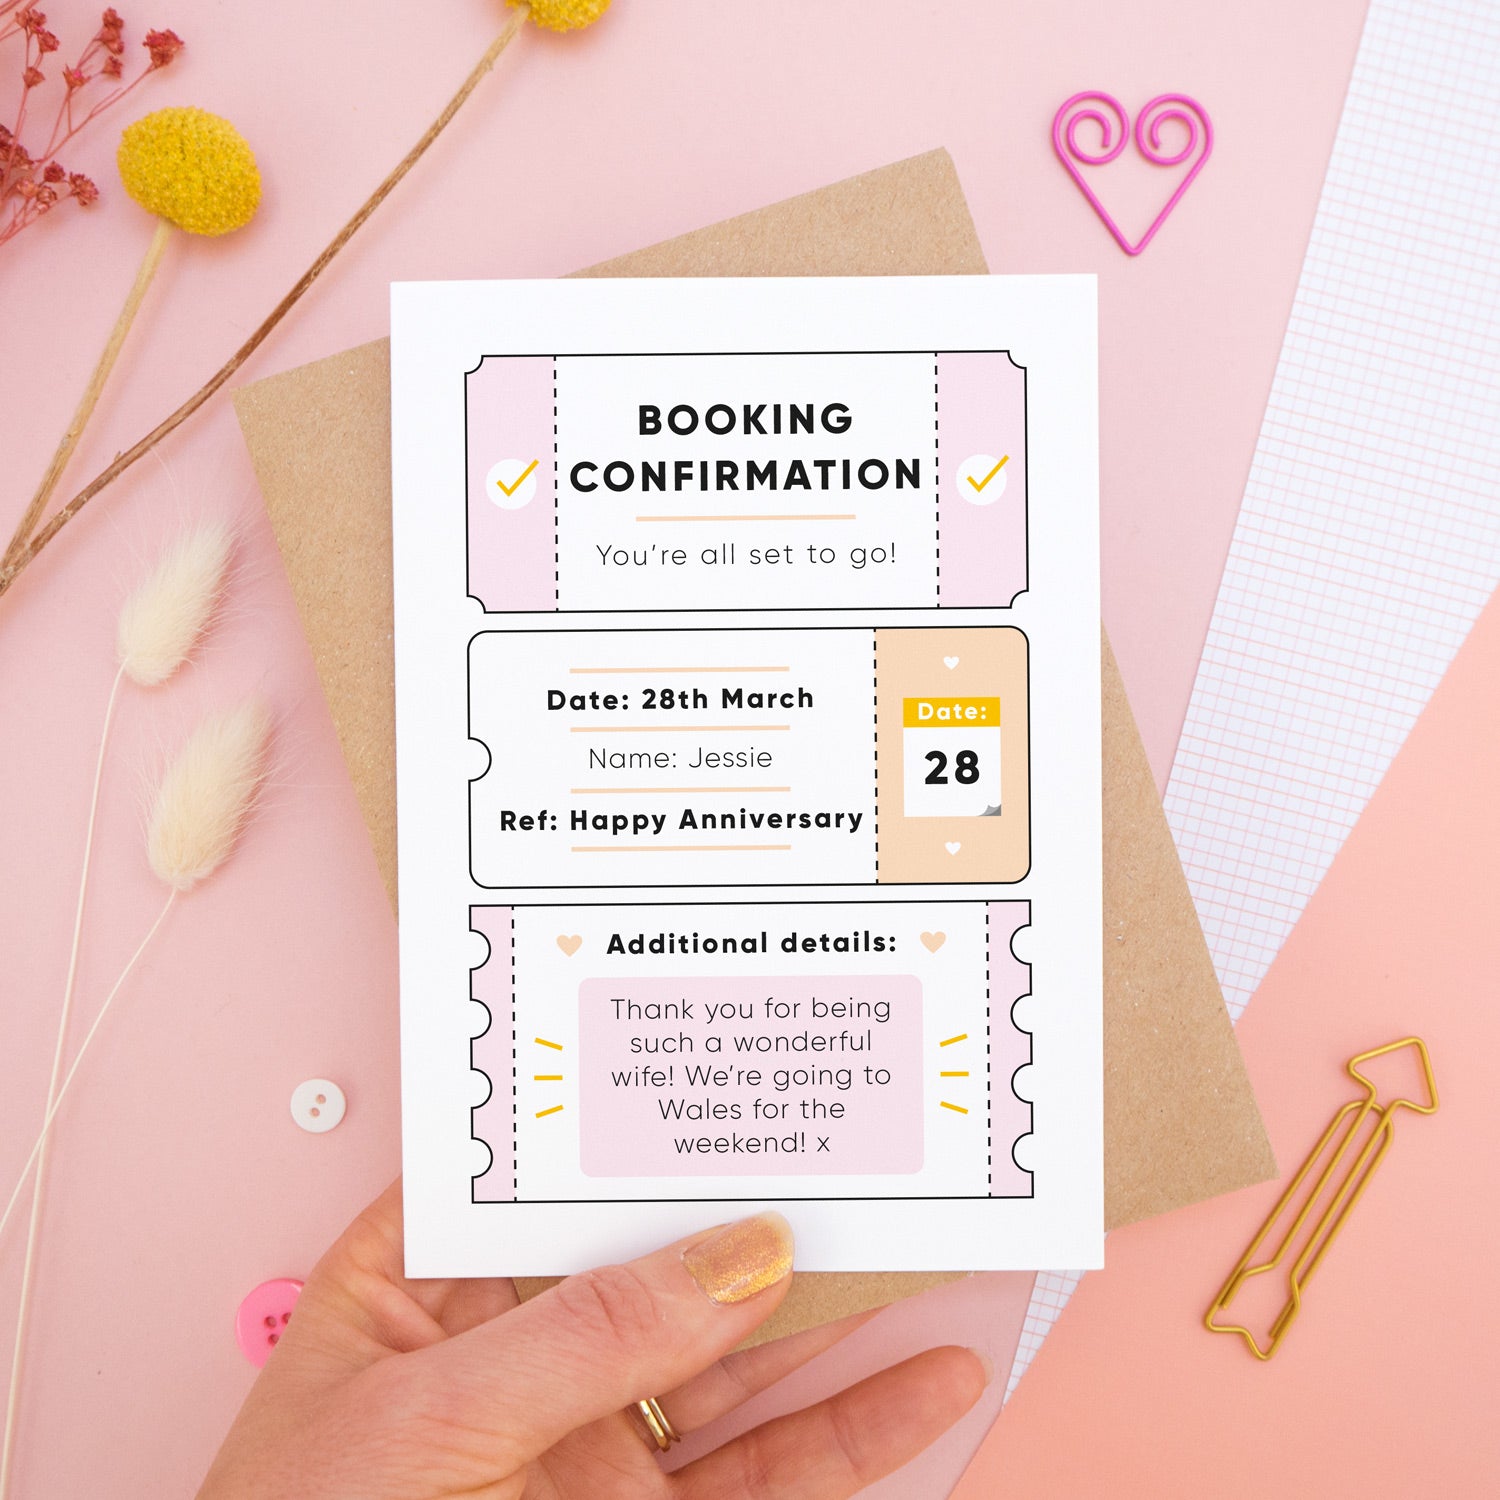 A personalised anniversary booking confirmation gift card held in front of a pink background scattered with dry flowers, grid paper, buttons and a heart. Pictured is the pink version of the card on top of a kraft brown envelope.